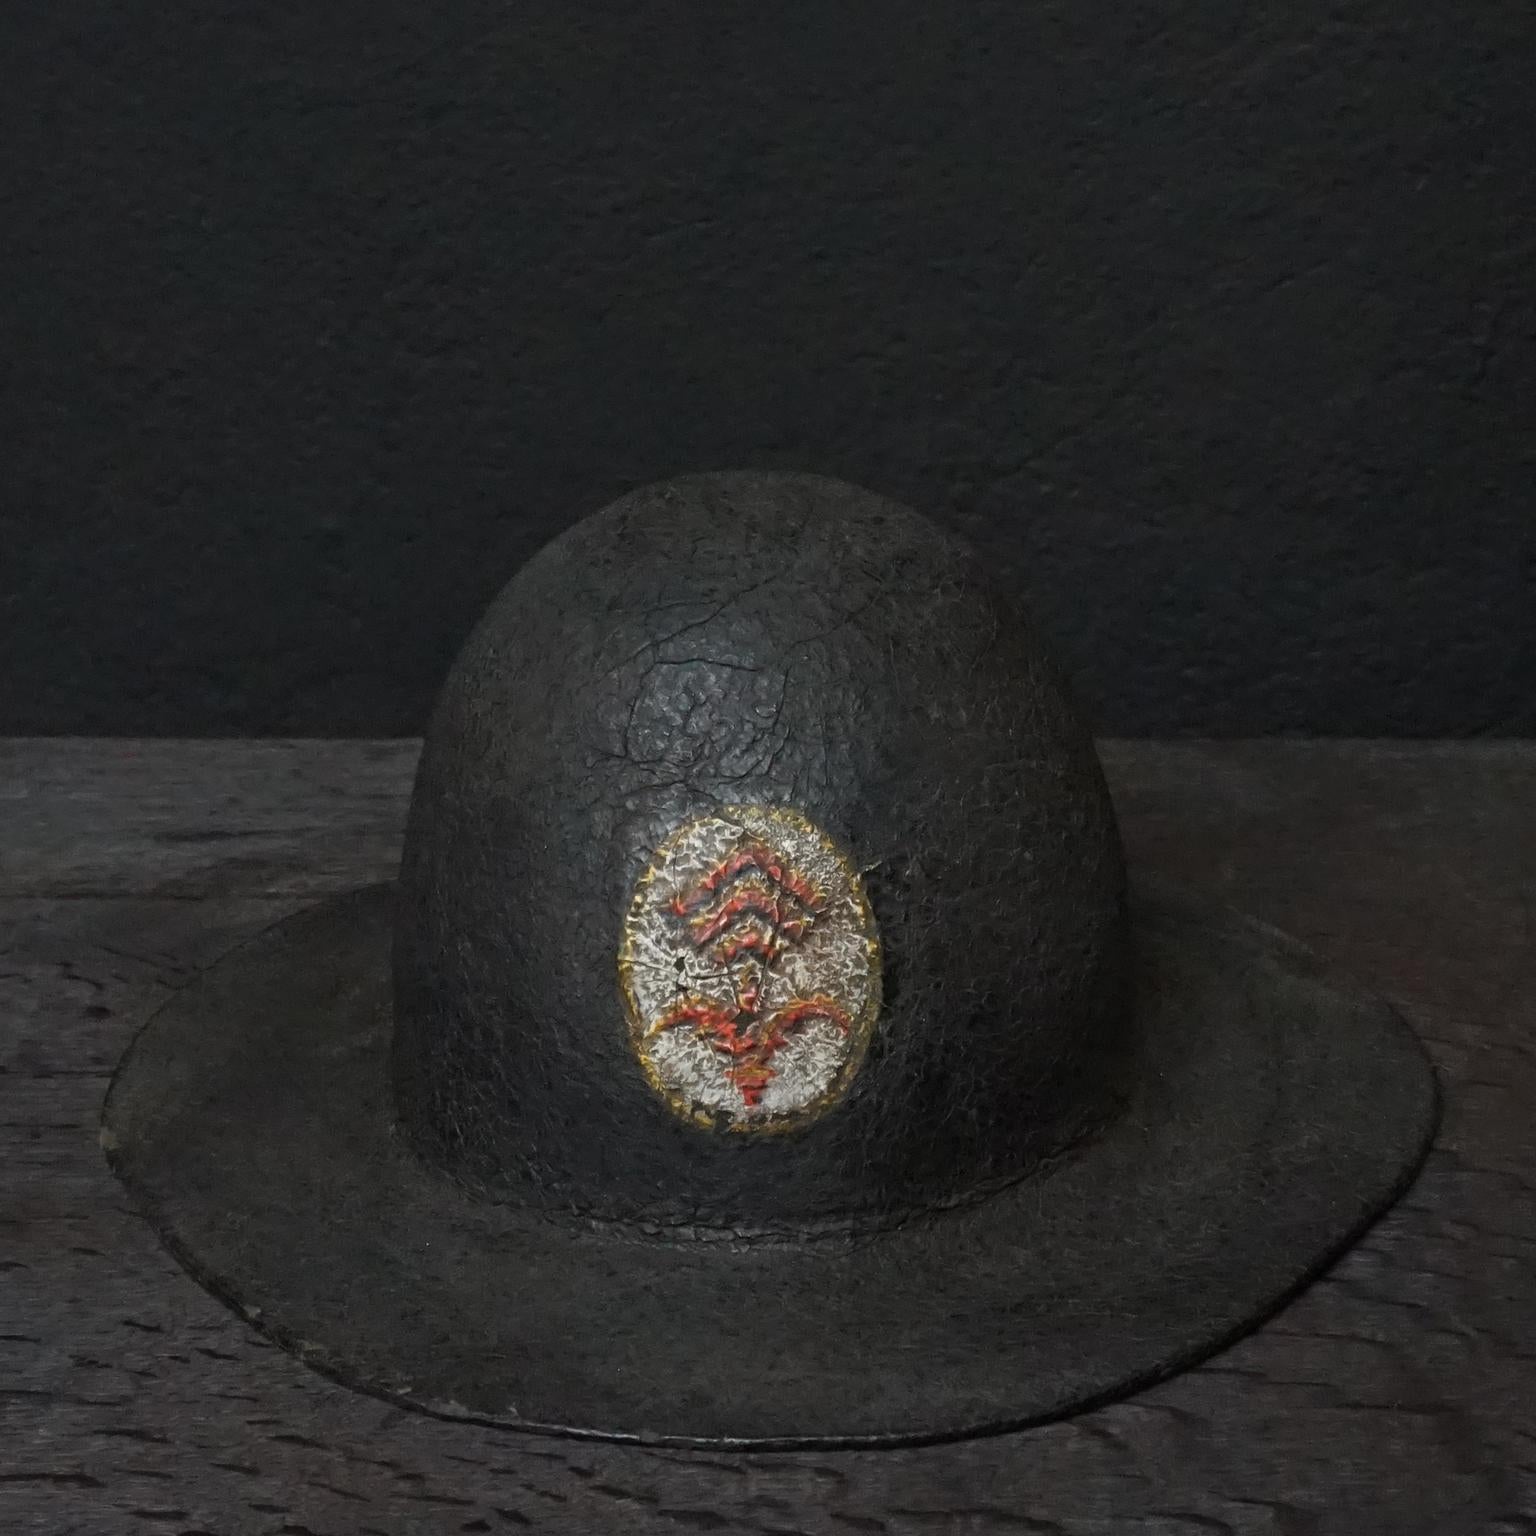 19th century black painted leather French fire helmet with painted logo with what looks like a 'French Lily' and three hooked lines
Made out of one piece of hardened and painted leather, soft leather lining held together by a (not original)